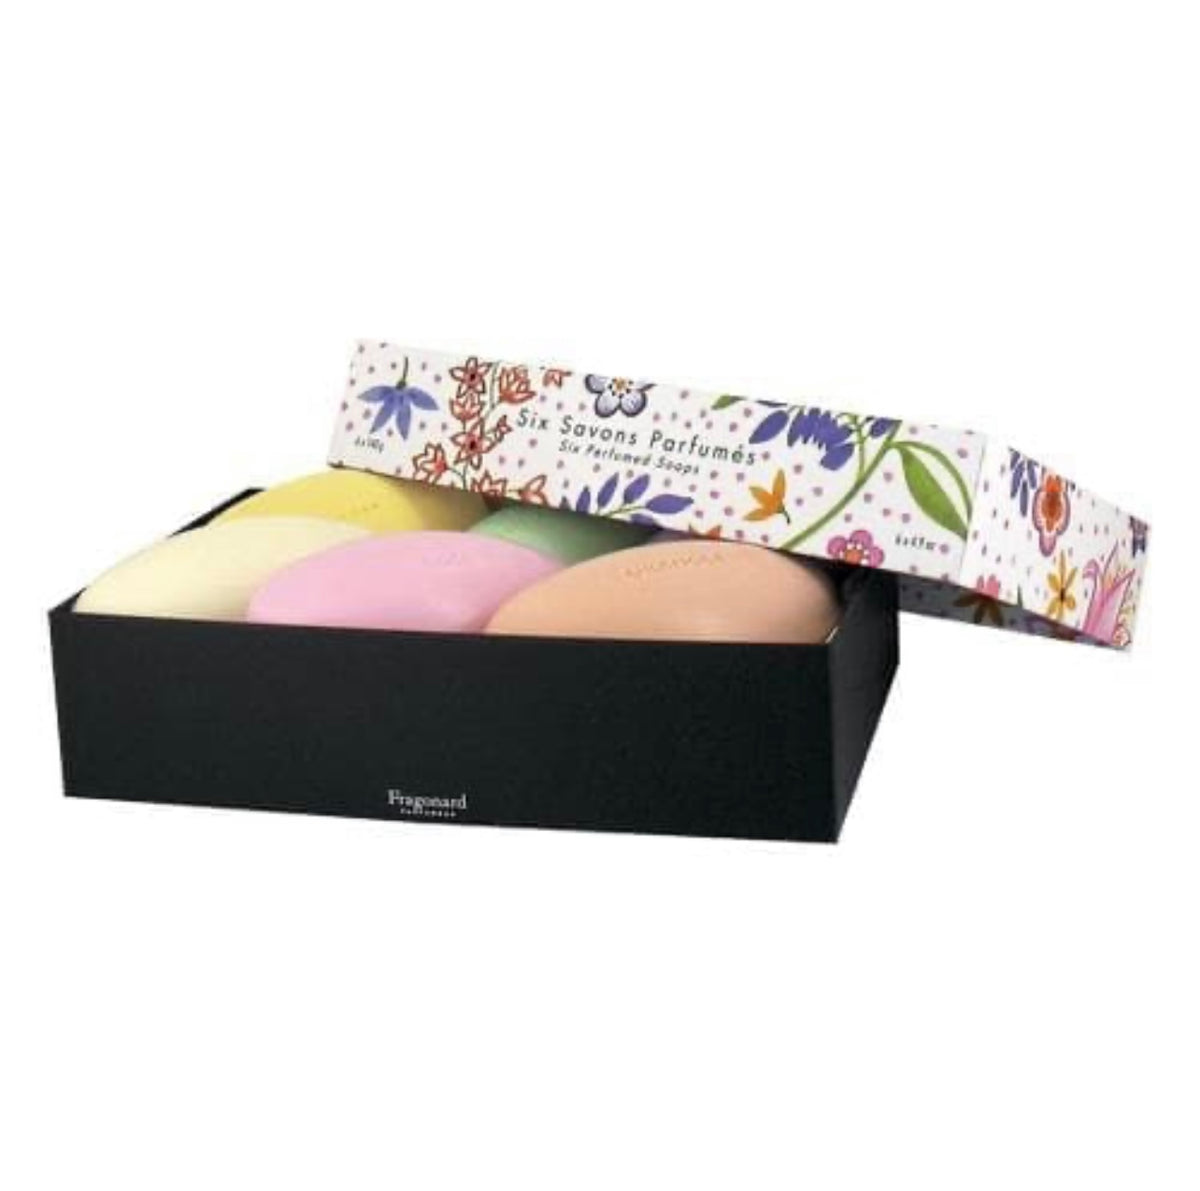 Fragonard Set of 6 Assorted Pebble Soaps in a Gift Box